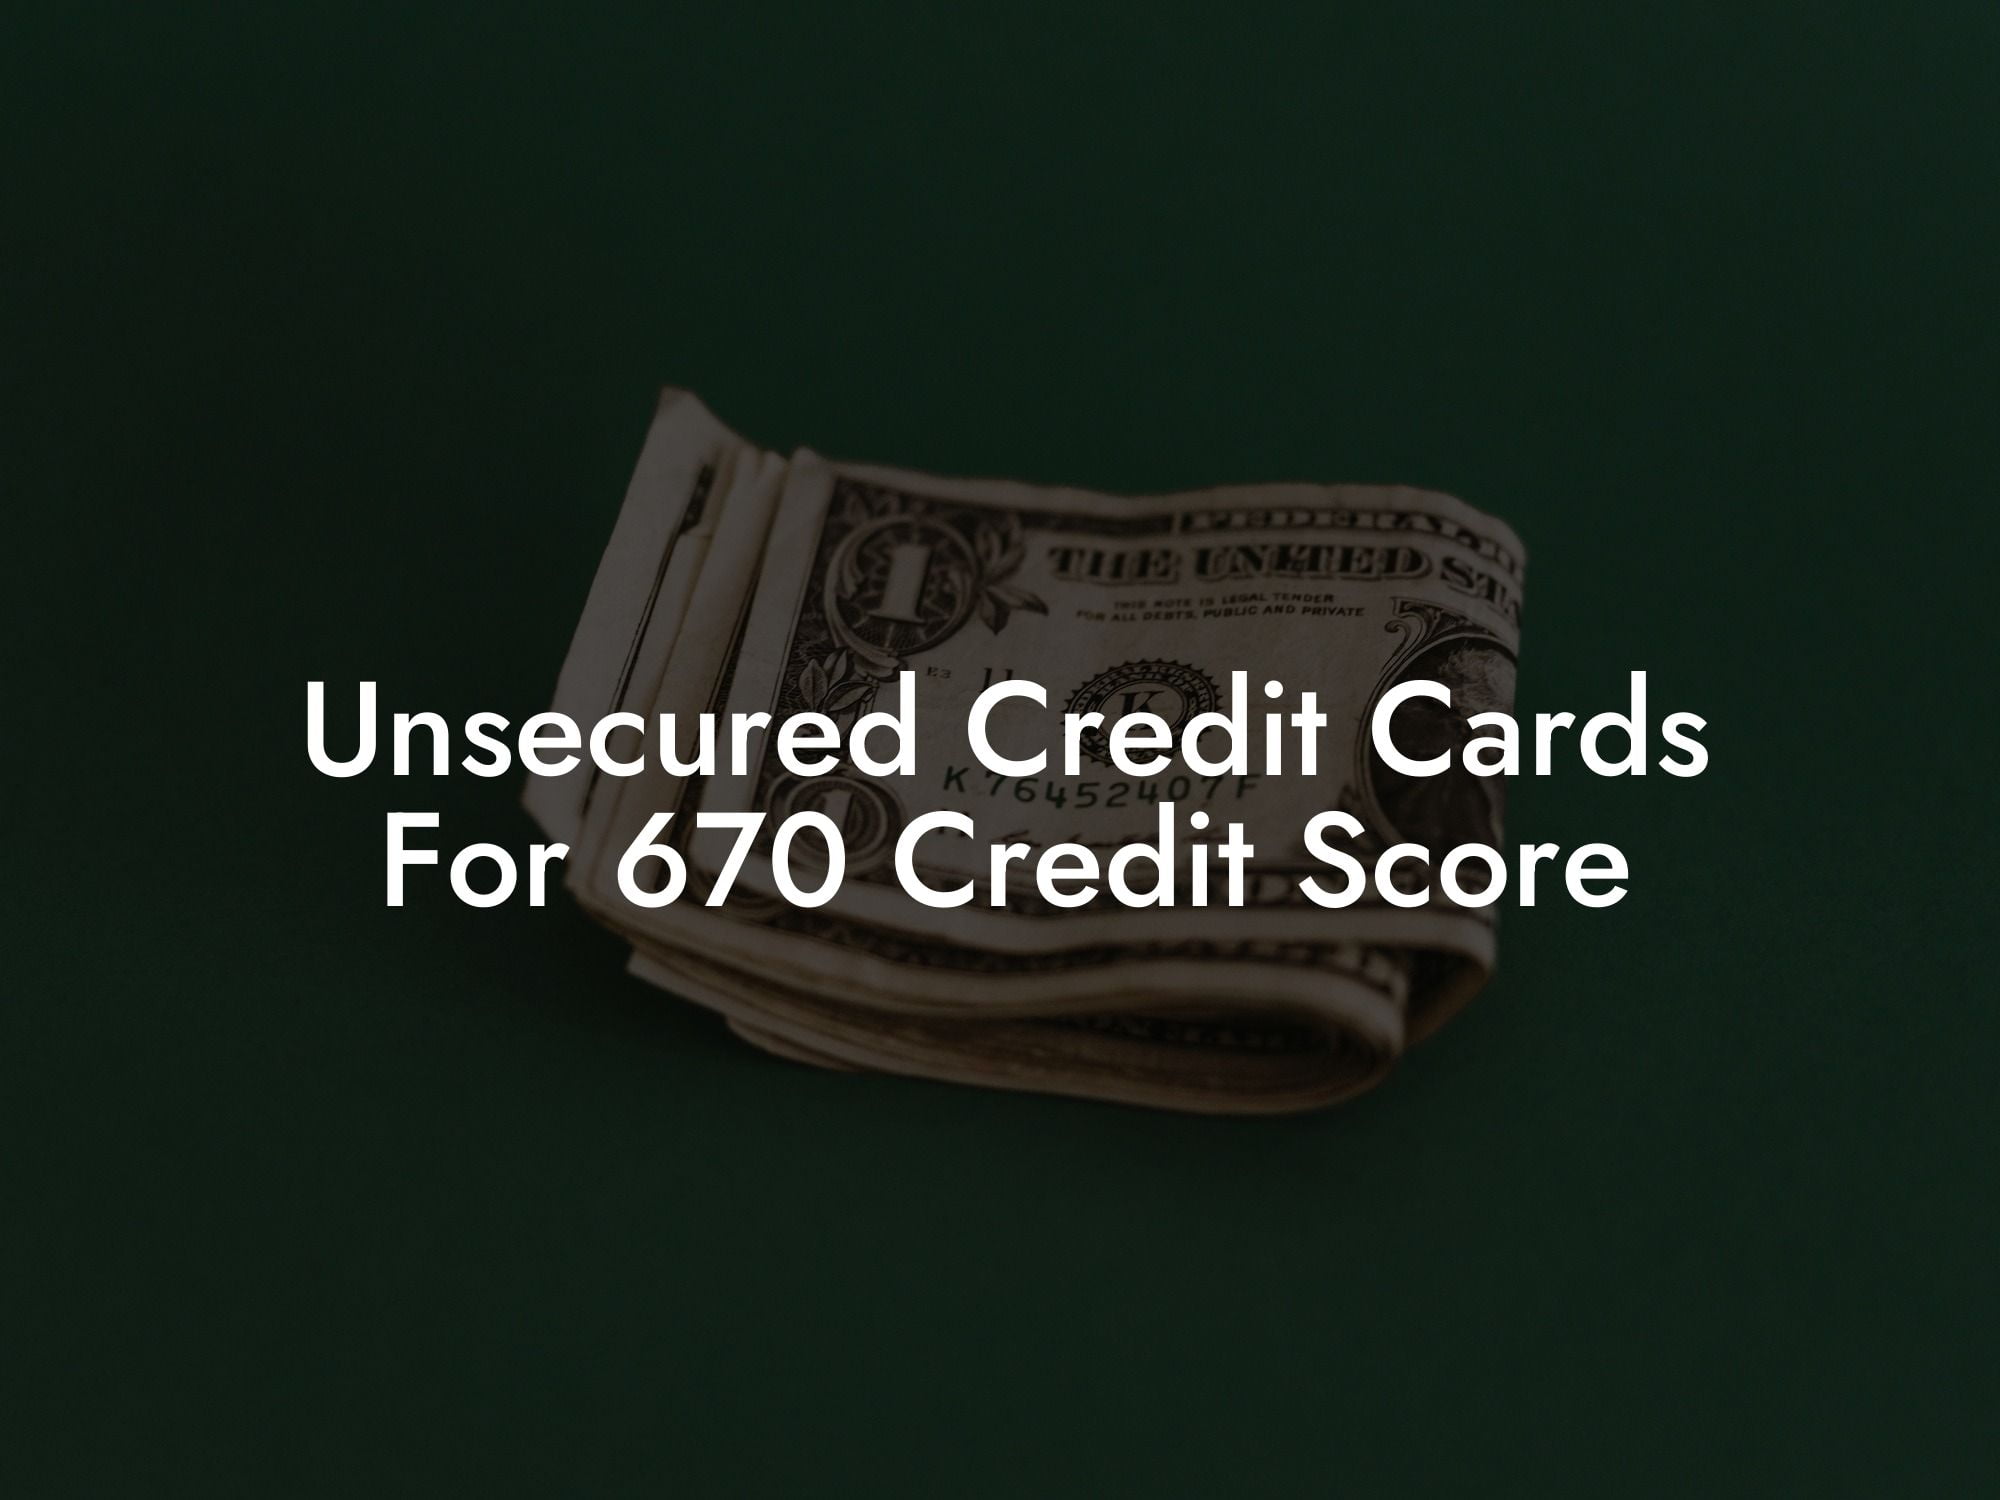 Unsecured Credit Cards For 670 Credit Score